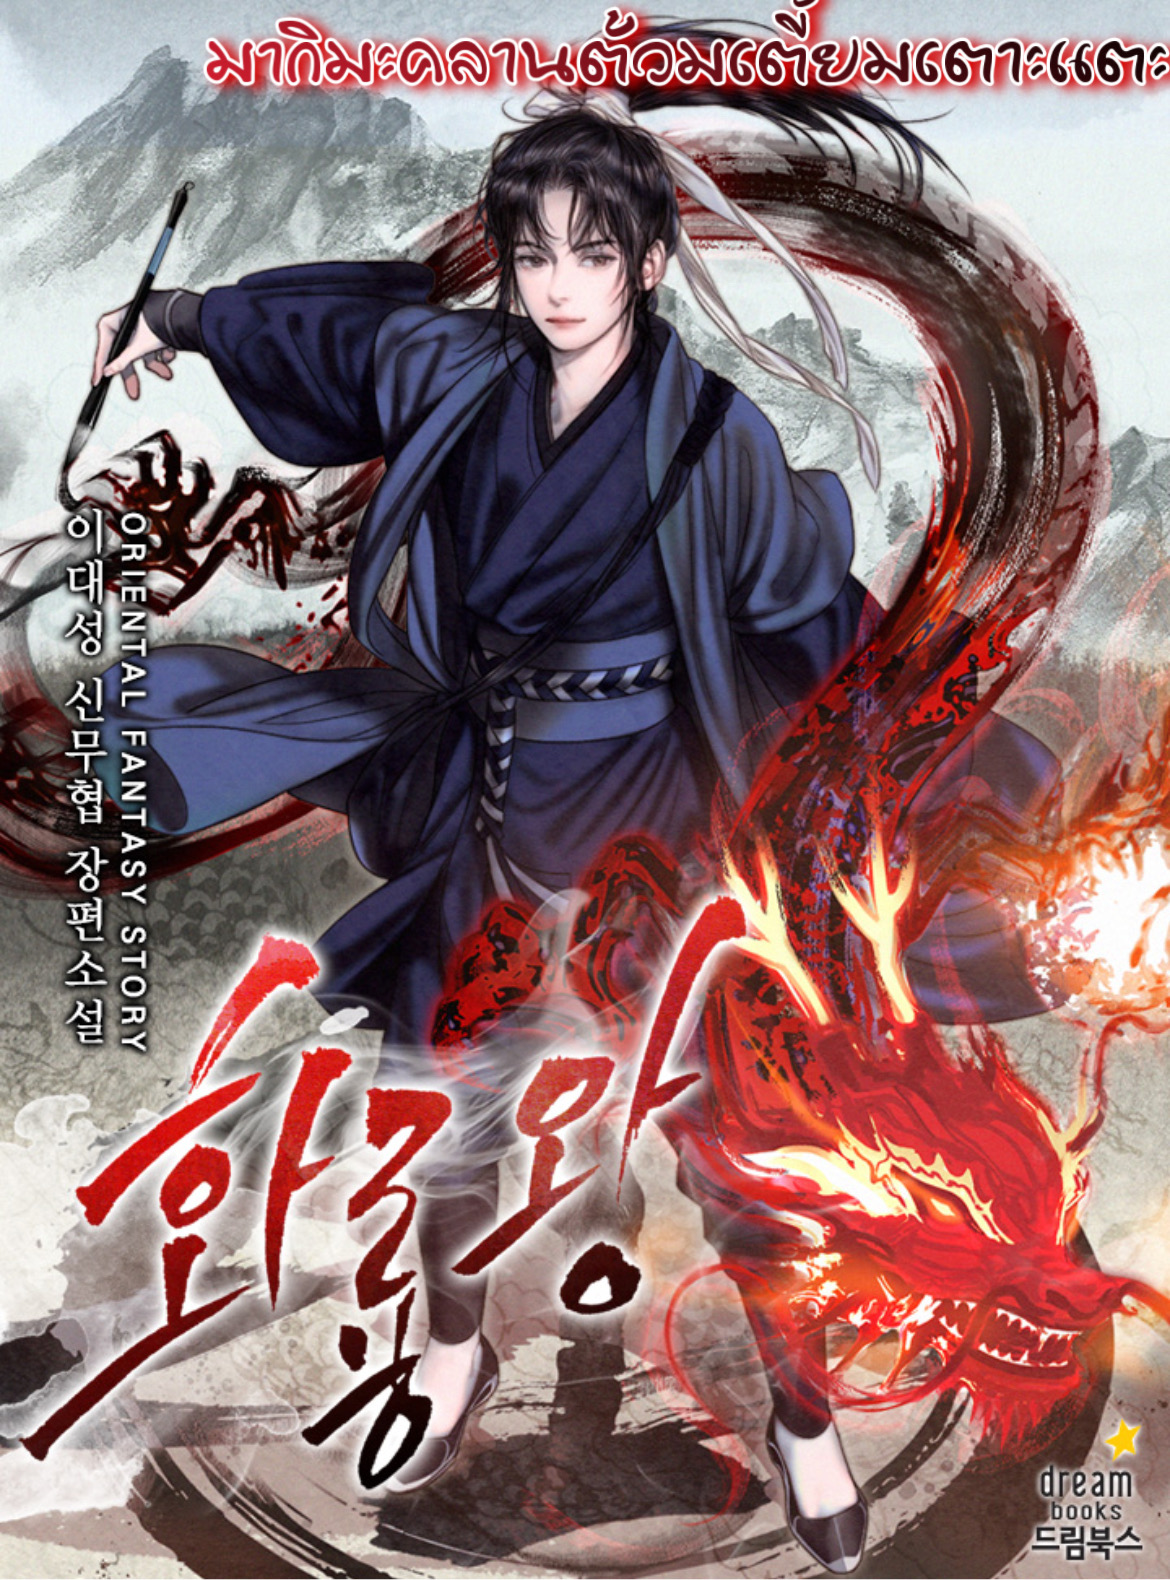 King of Fire Dragon 12 08